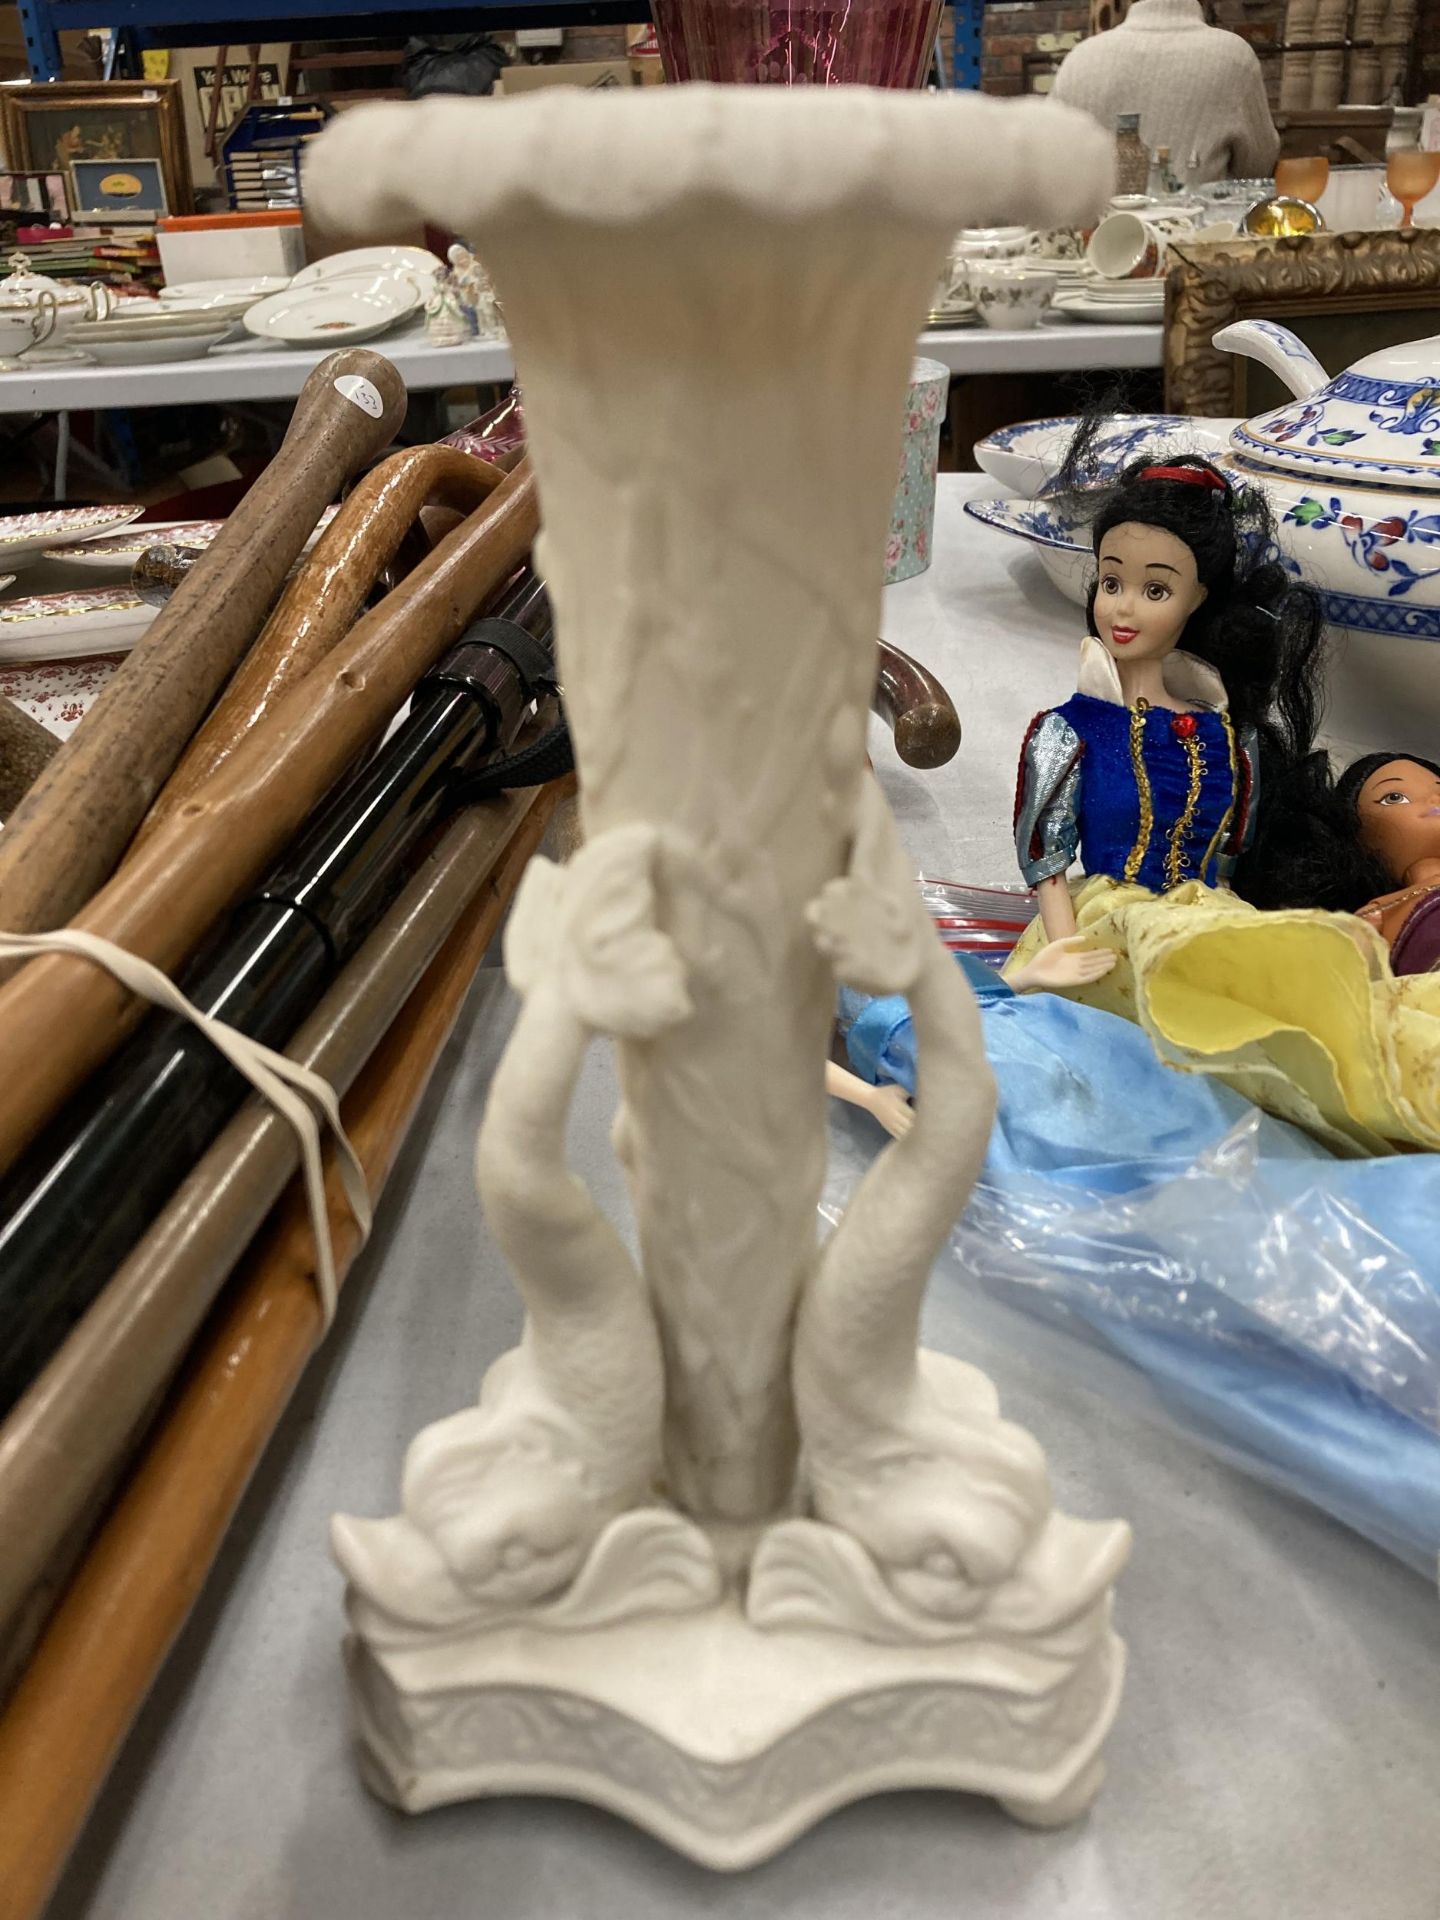 TWO PIECES OF PARIEN WARE TO INCLUDE A BUST OF QUEEN VICTORIA AND A VASE WITH FISH DECORATION - Image 2 of 3